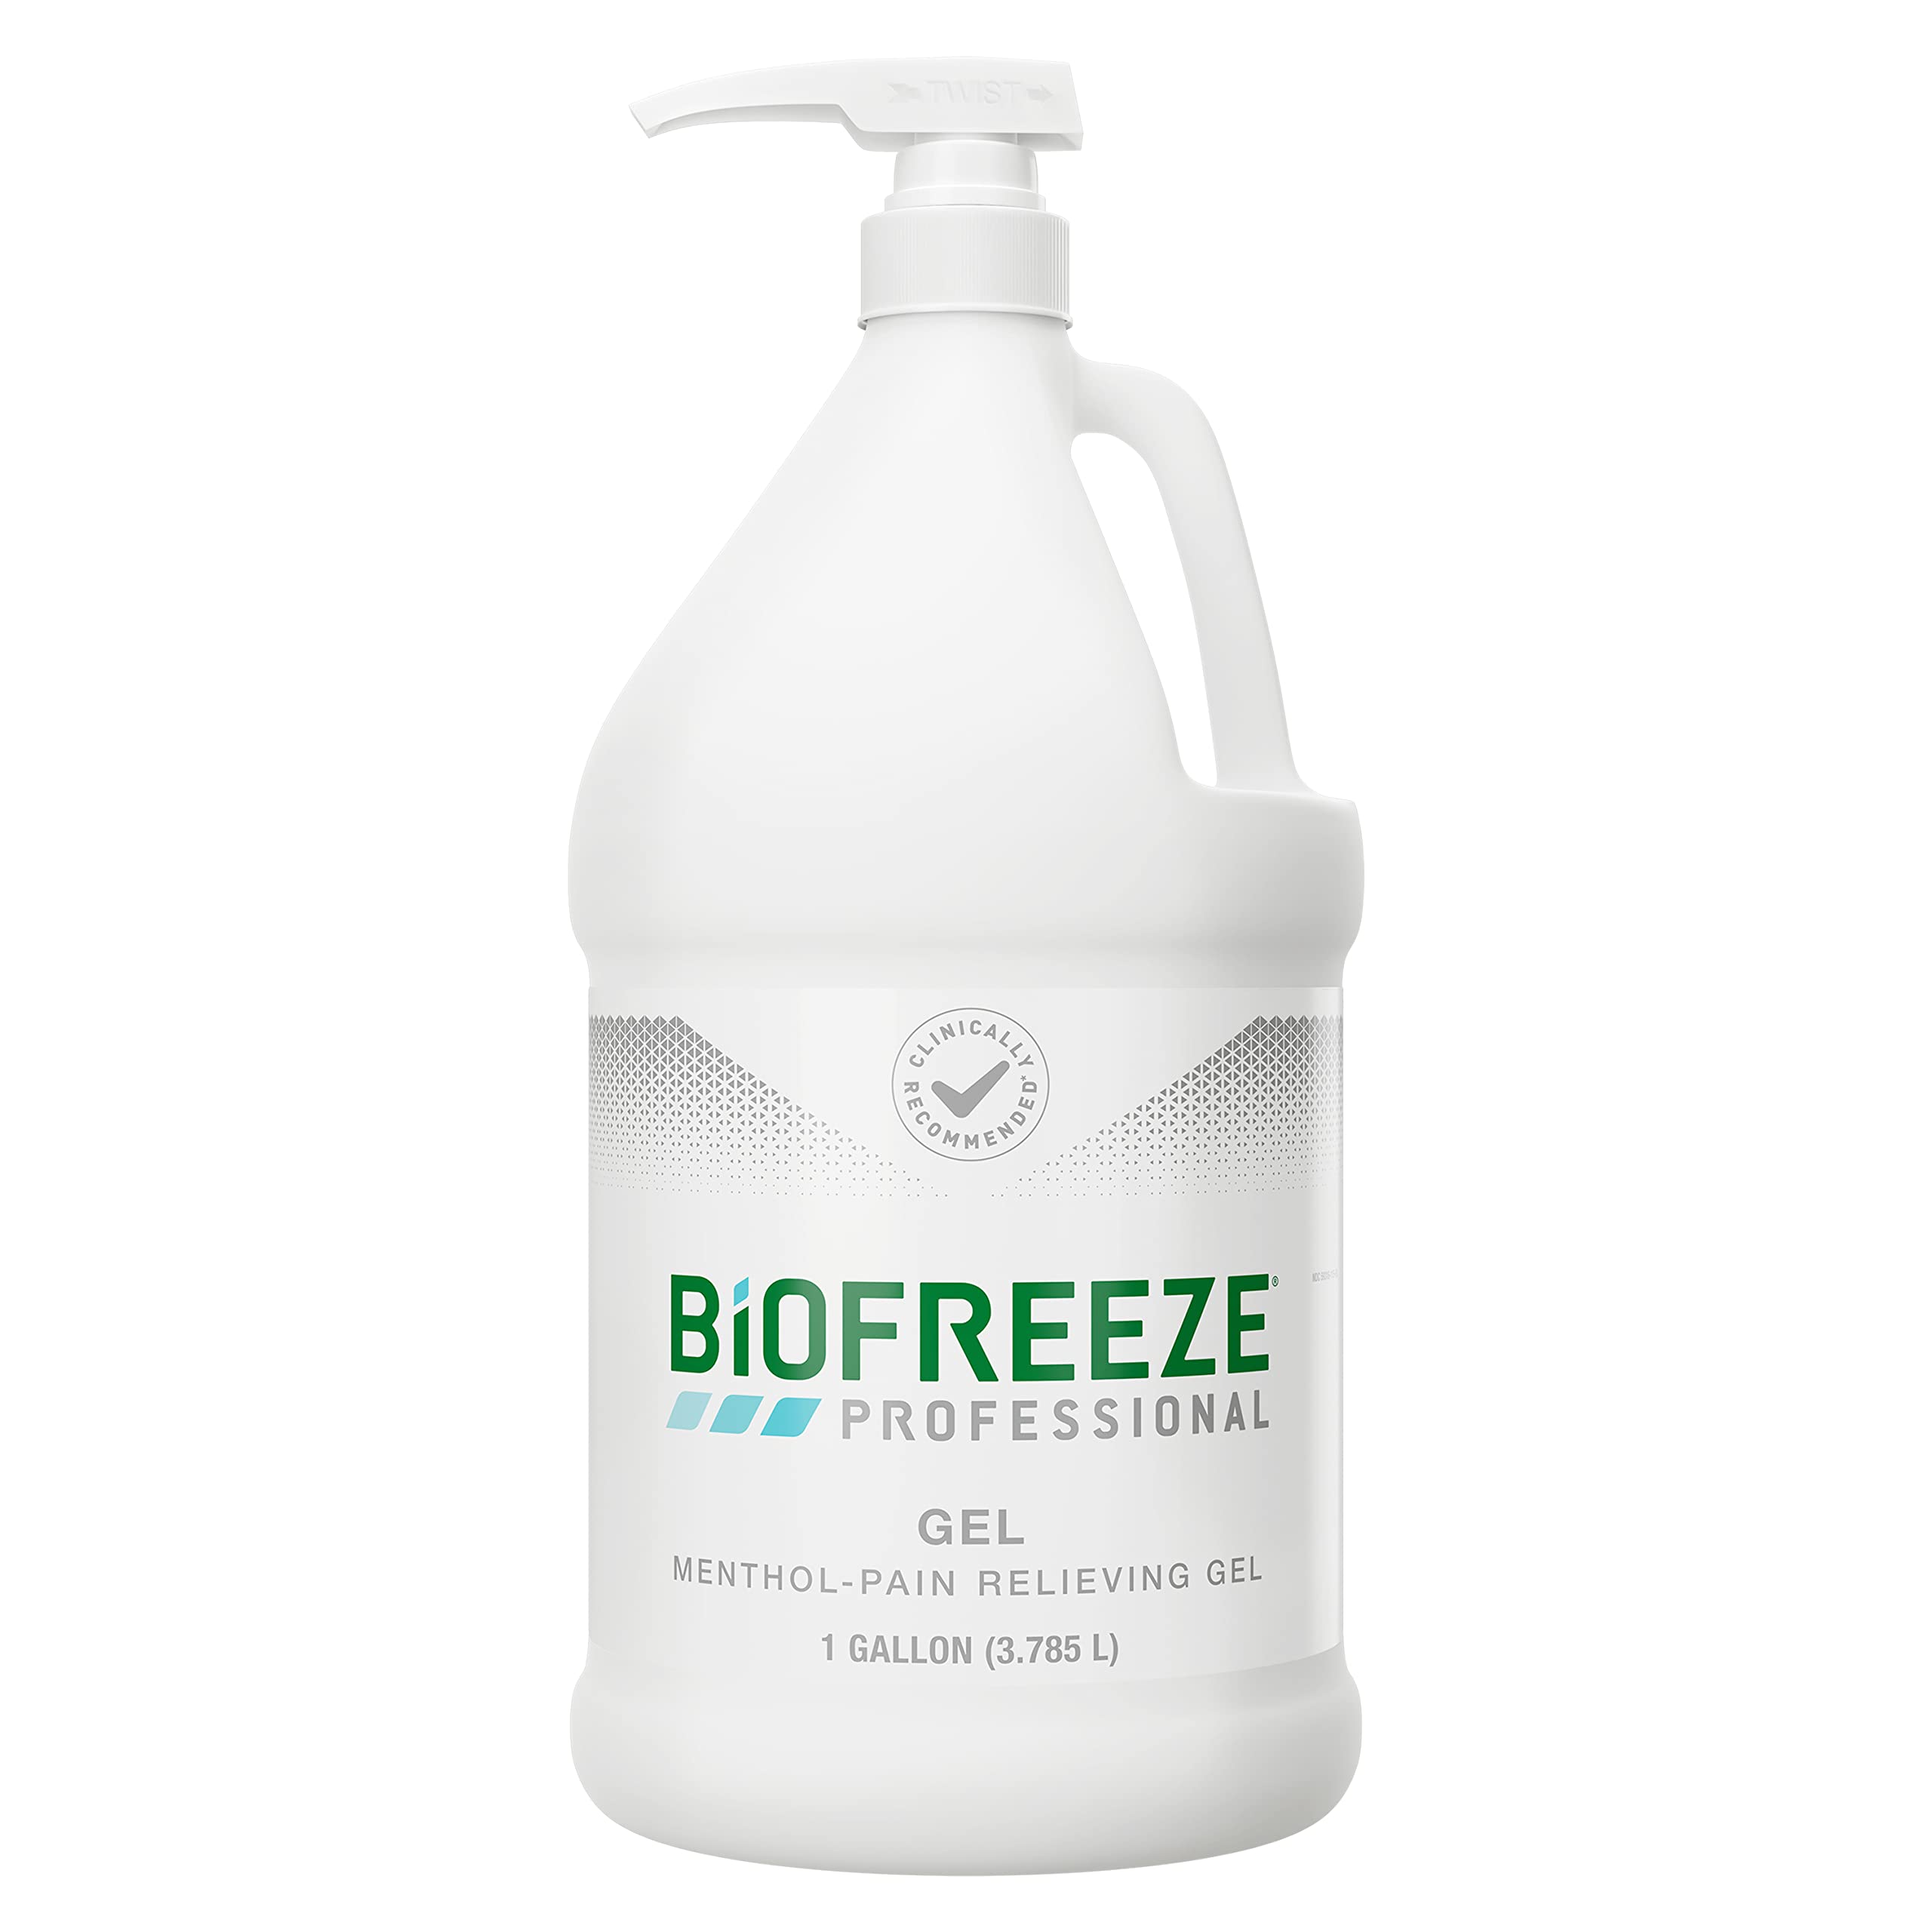 1 gallon Biofreeze professional $99.67 with S&S and Prime @Amazon